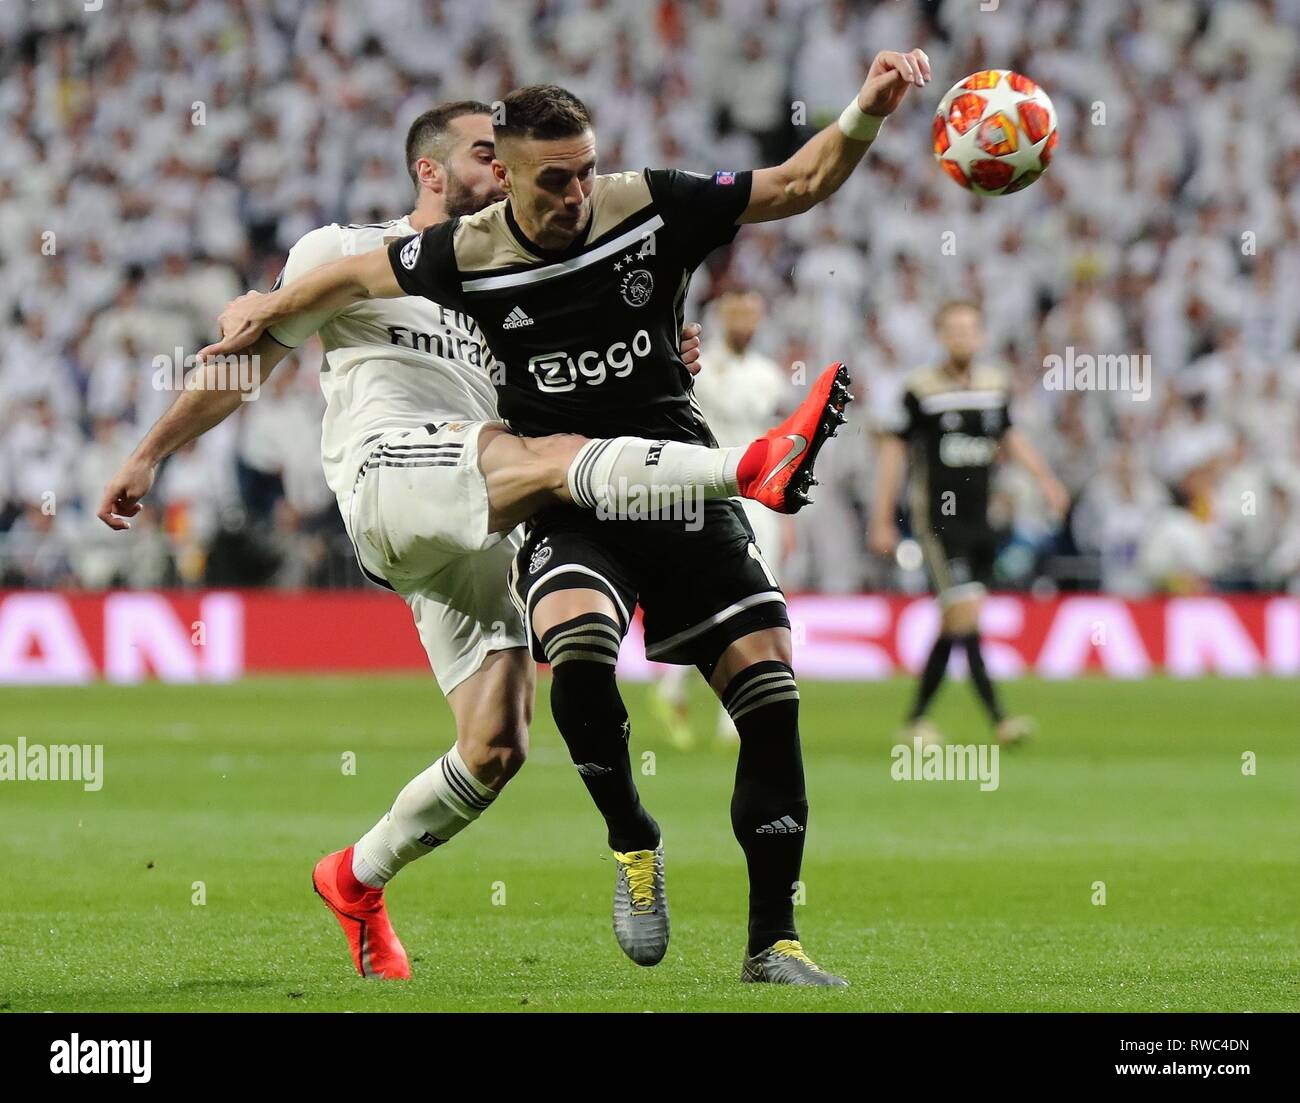 Madrid, Spain. 5th Mar, 2019. Real Madrid's Dani Carvajal (L) vies with Ajax's Dusan Tadic during the UEFA Champions League round of 16 second leg soccer match between Real Madrid and Ajax in Madrid, Spain, on March 5, 2019. Credit: Edward F. Peters/Xinhua/Alamy Live News Stock Photo